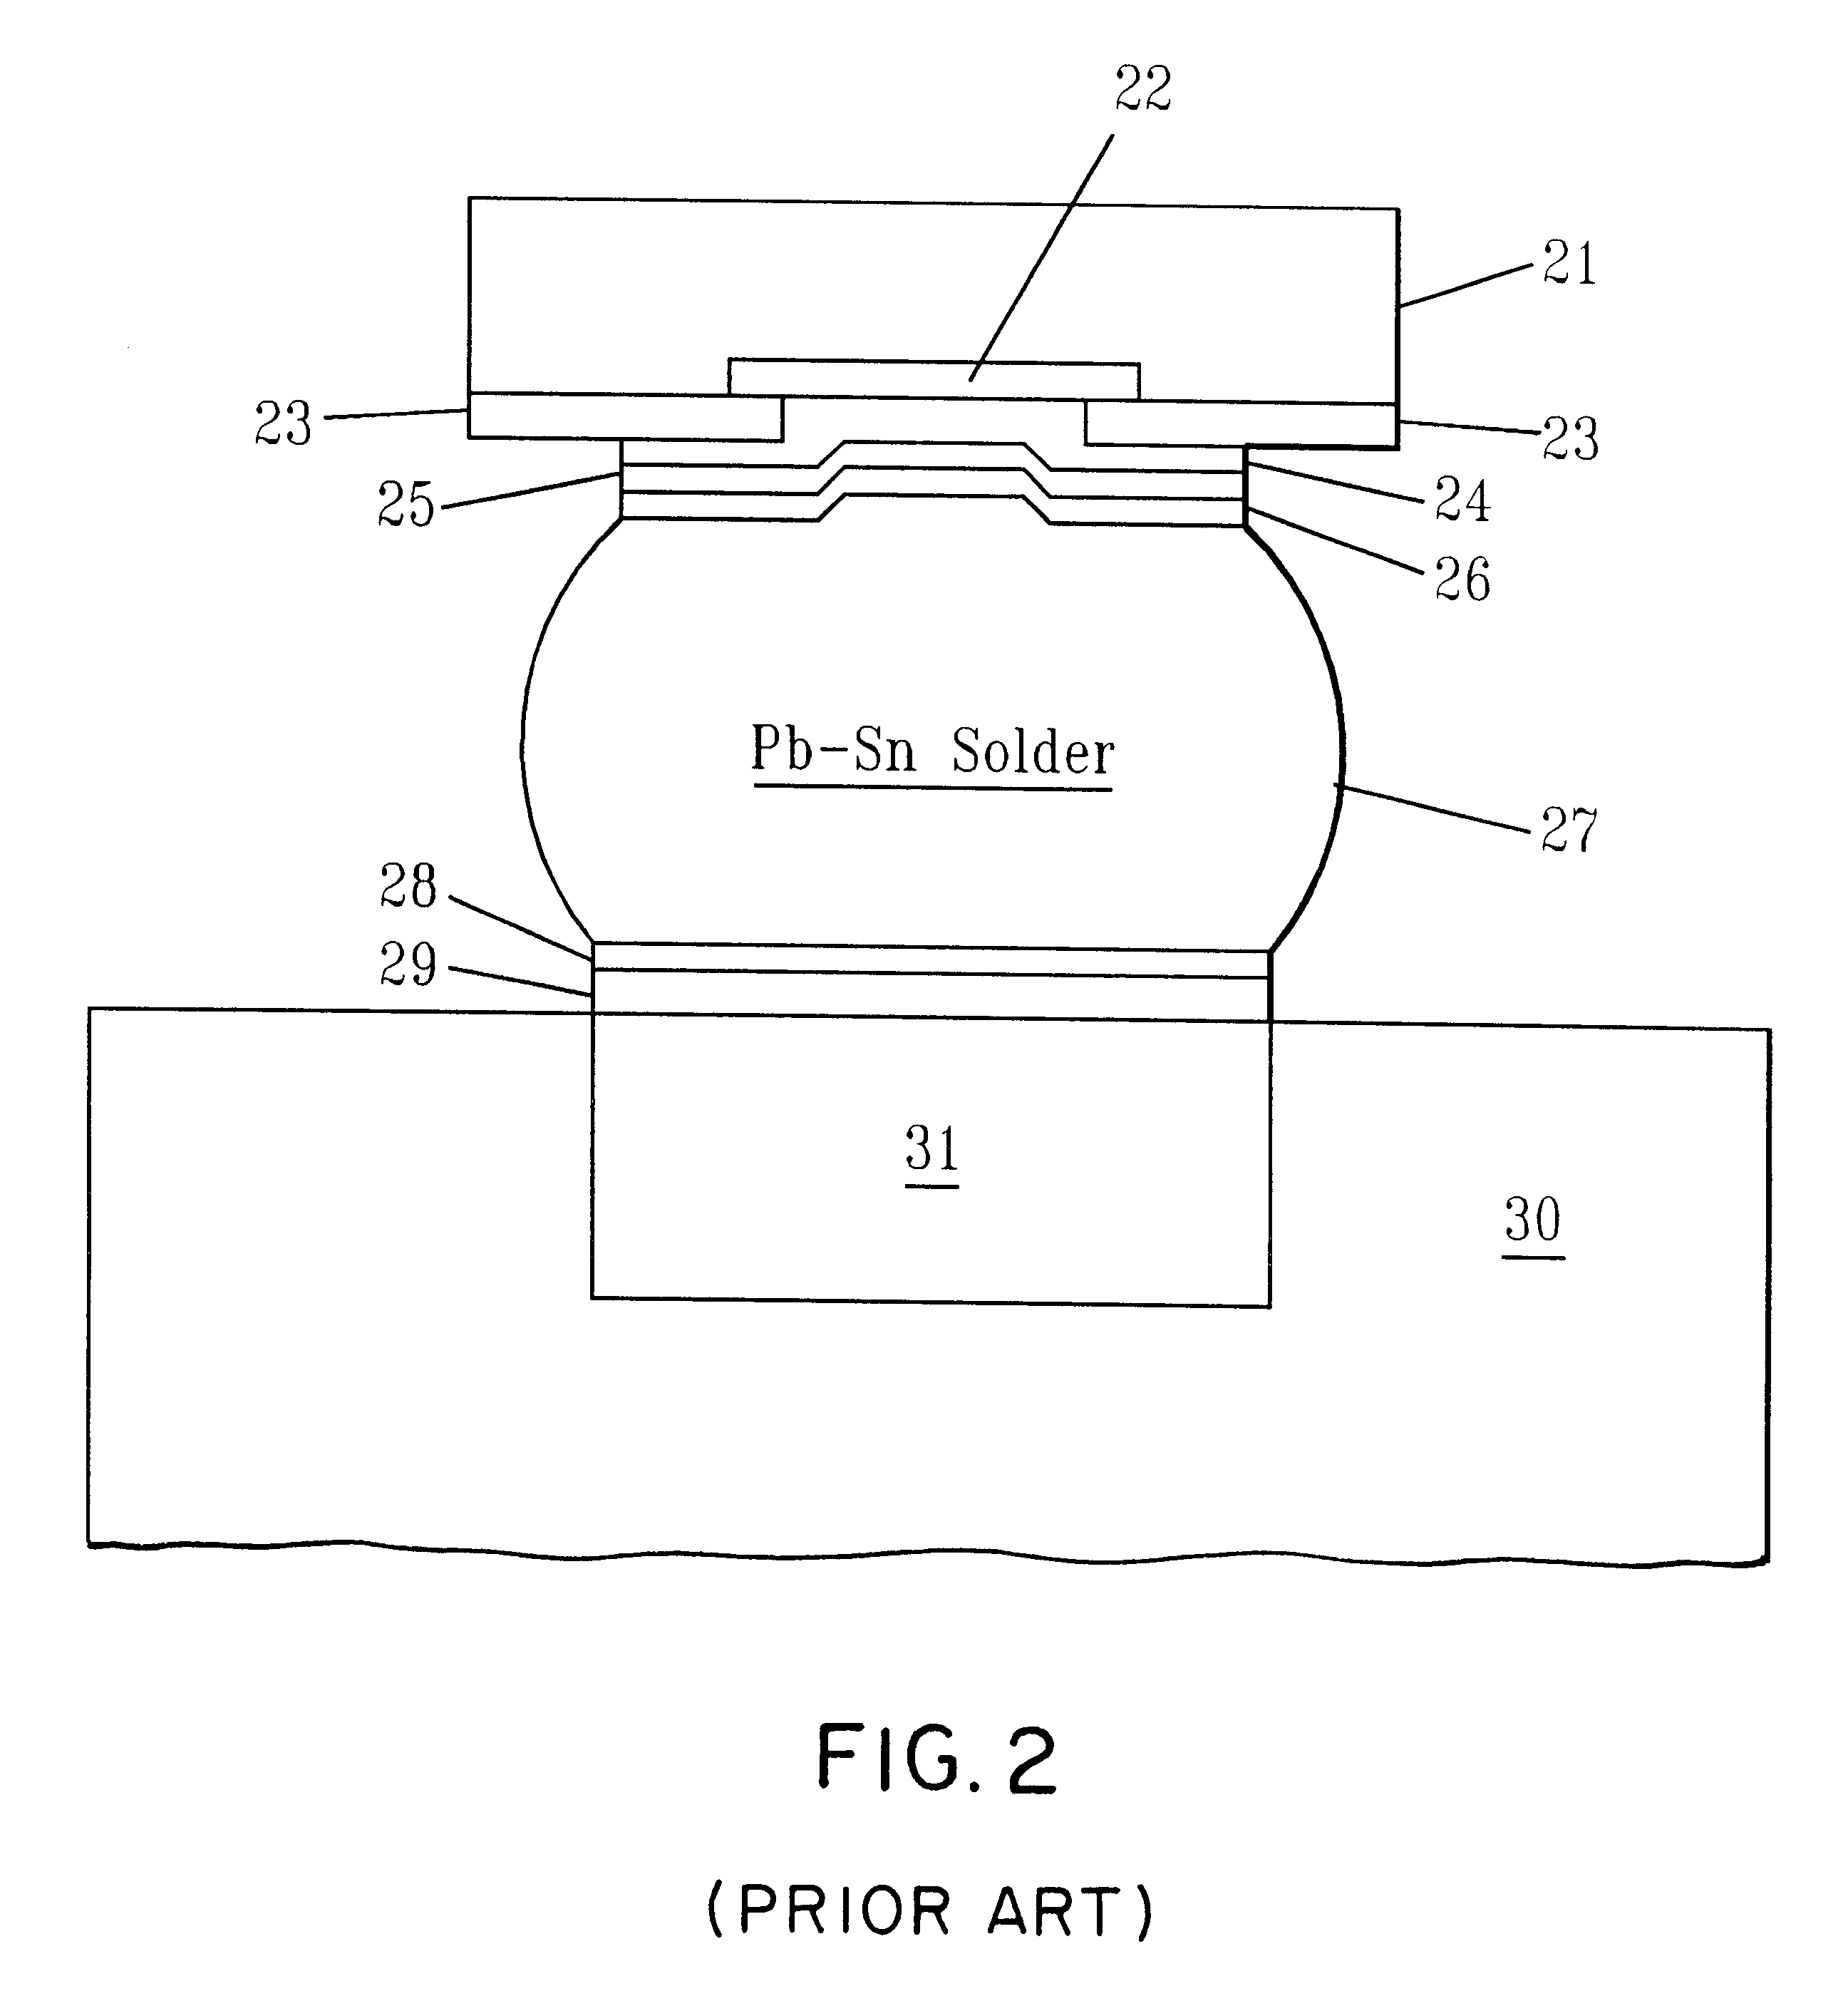 Structure employing electrically conductive adhesives